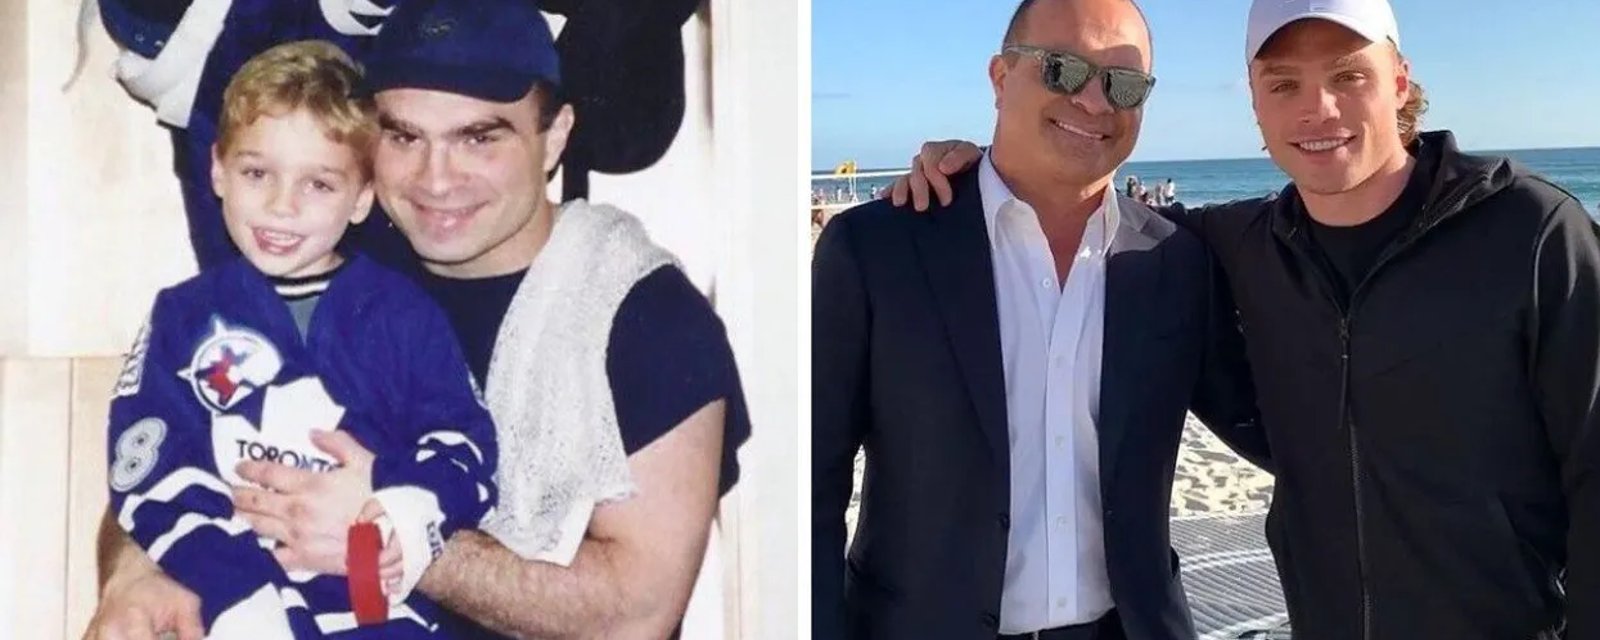 Max and Tie Domi team up on latest project and Leafs fans are loving it!